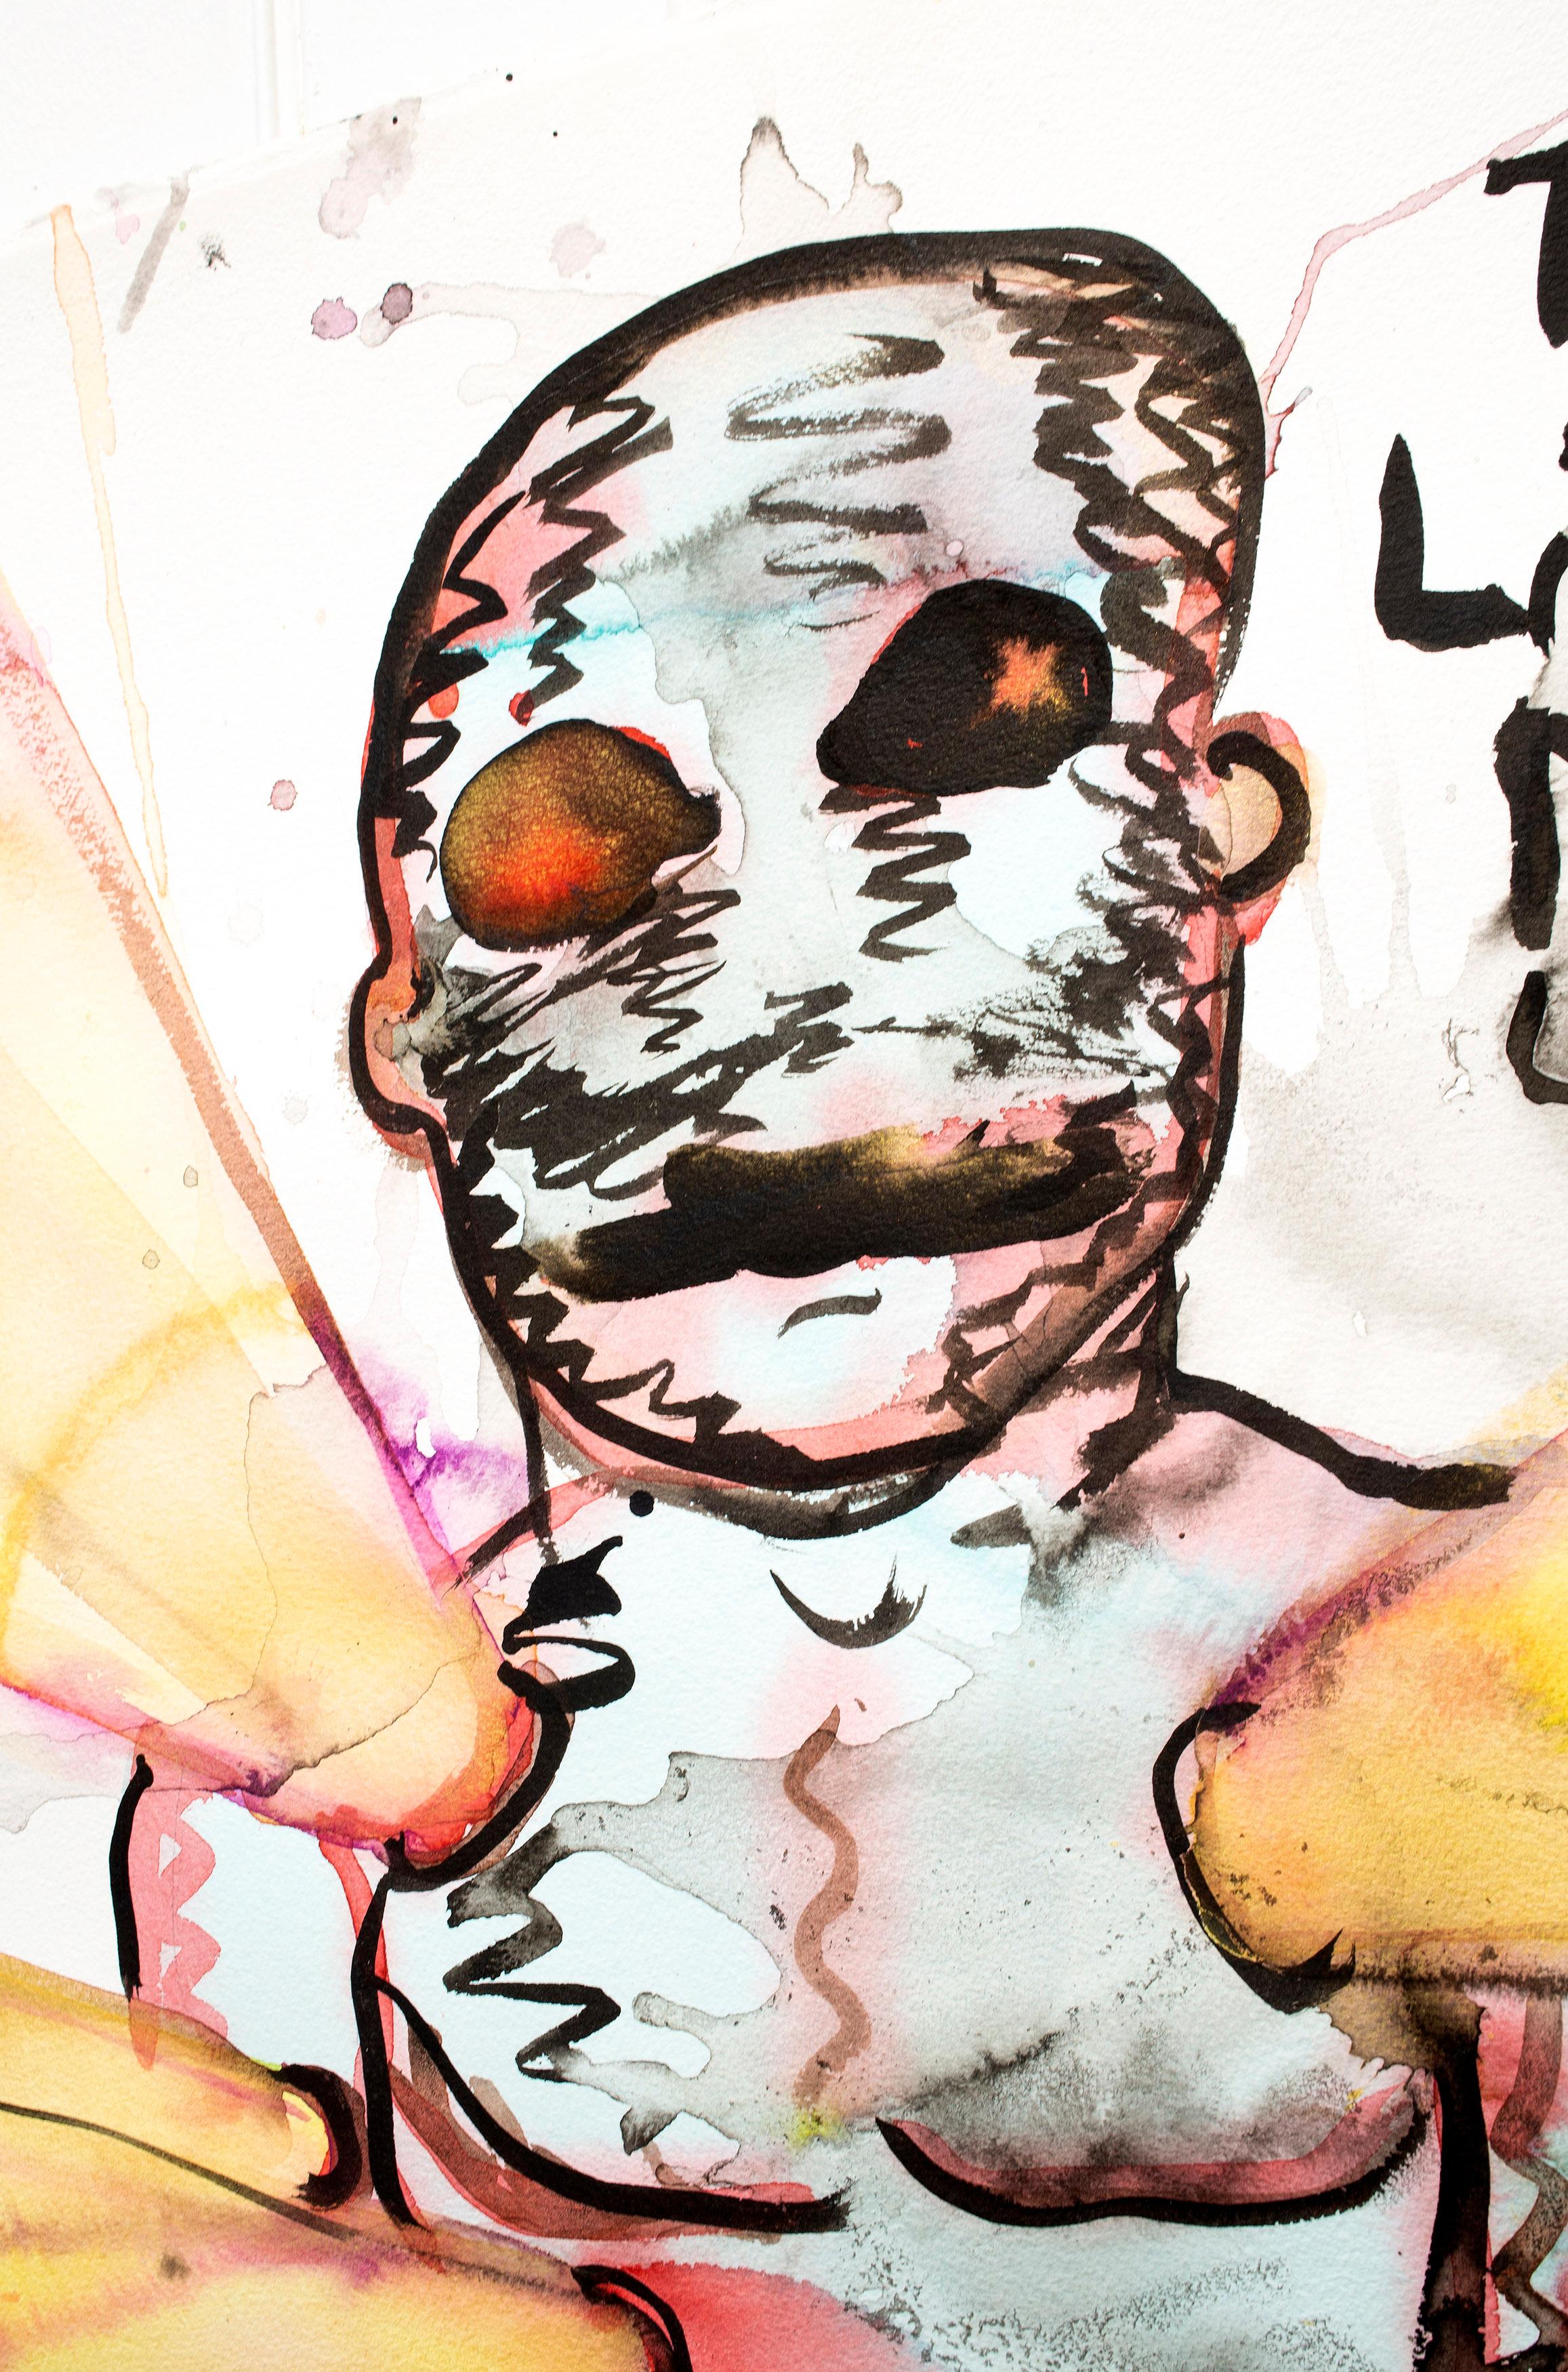 The lightbulb man is Bjarne Melgaard’s most acknowledged character. Also the absolutely rarest. The lightbulb man is often depicted with holes in its body, with light rays exiting or entering. These can give associations to the stains that can